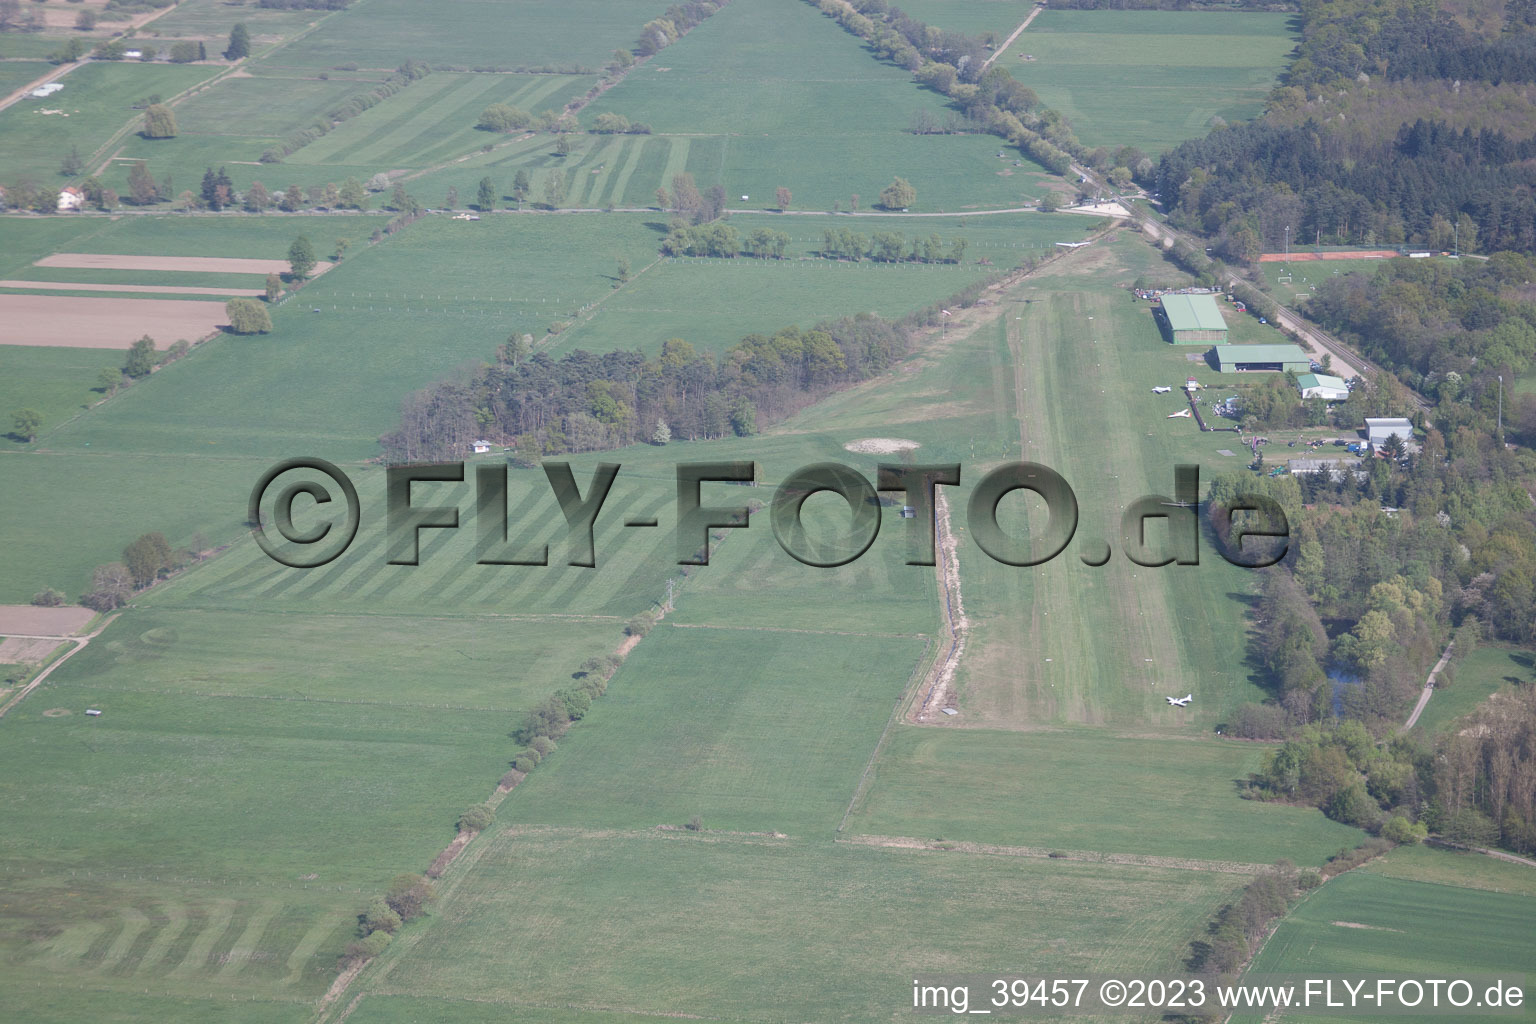 Oblique view of Airfield in Schweighofen in the state Rhineland-Palatinate, Germany